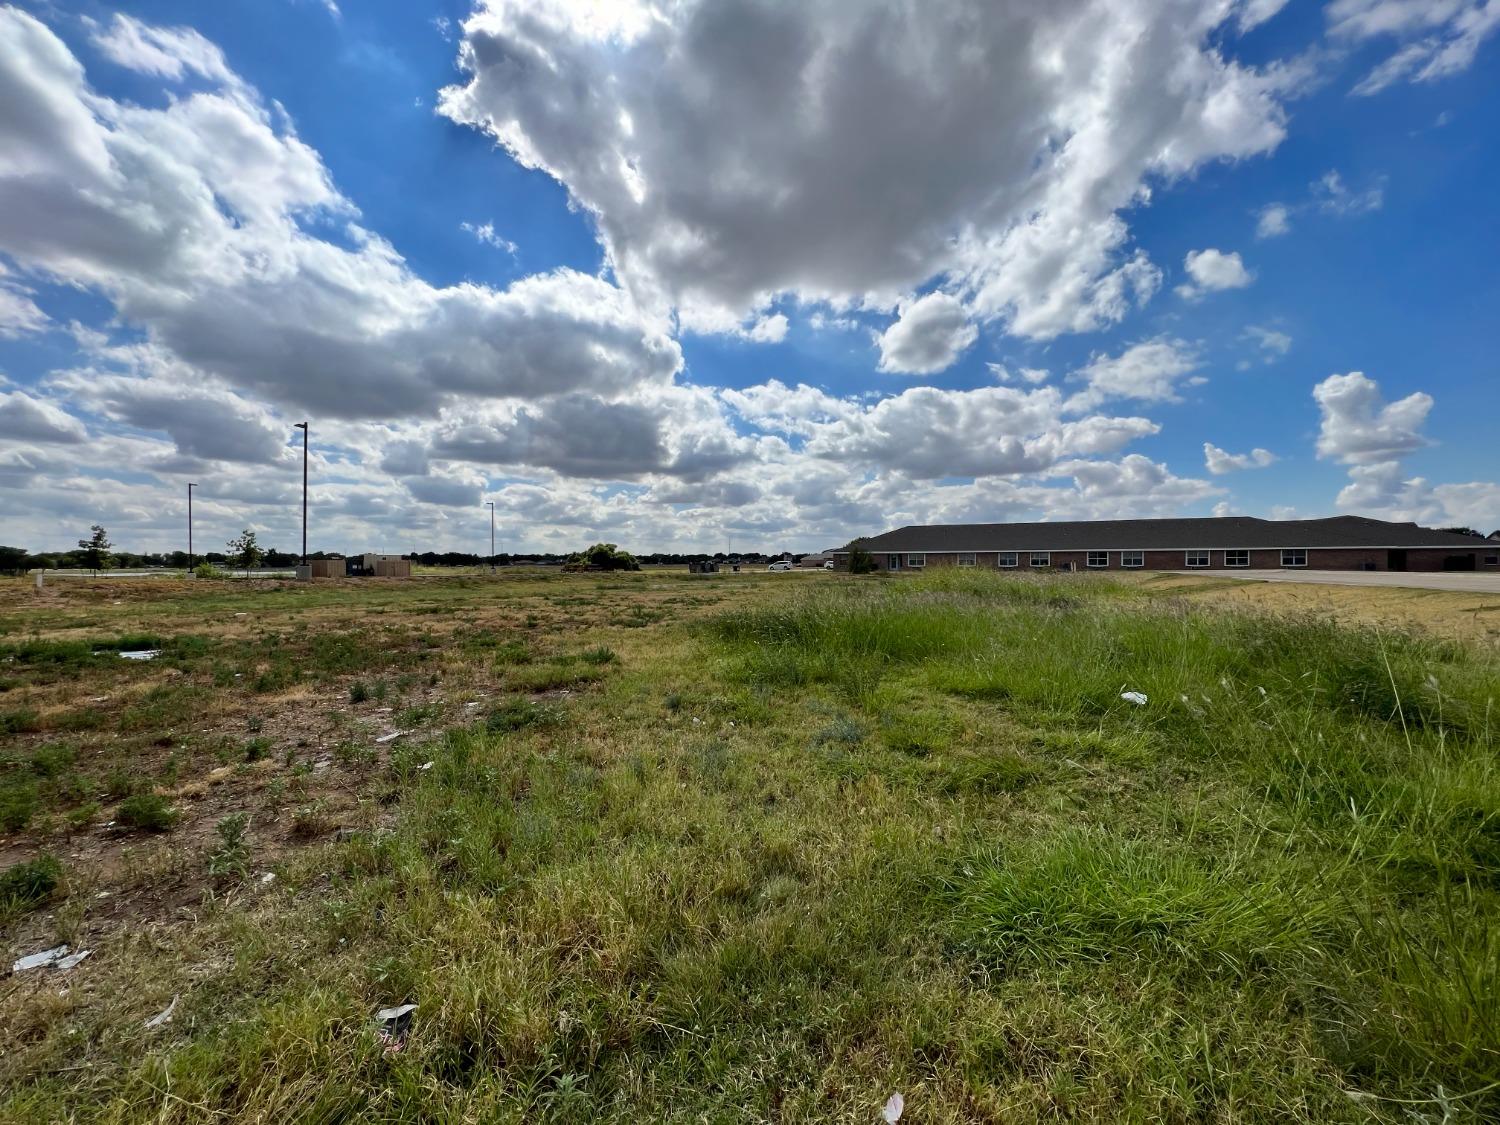 In a great location, this lot is ready for development. The land is right behind Shipley Do-Nuts. Approx: .57 acres. The entrance to the land is in front of Taco Casa. Perfectly zoned for new offices or retail.